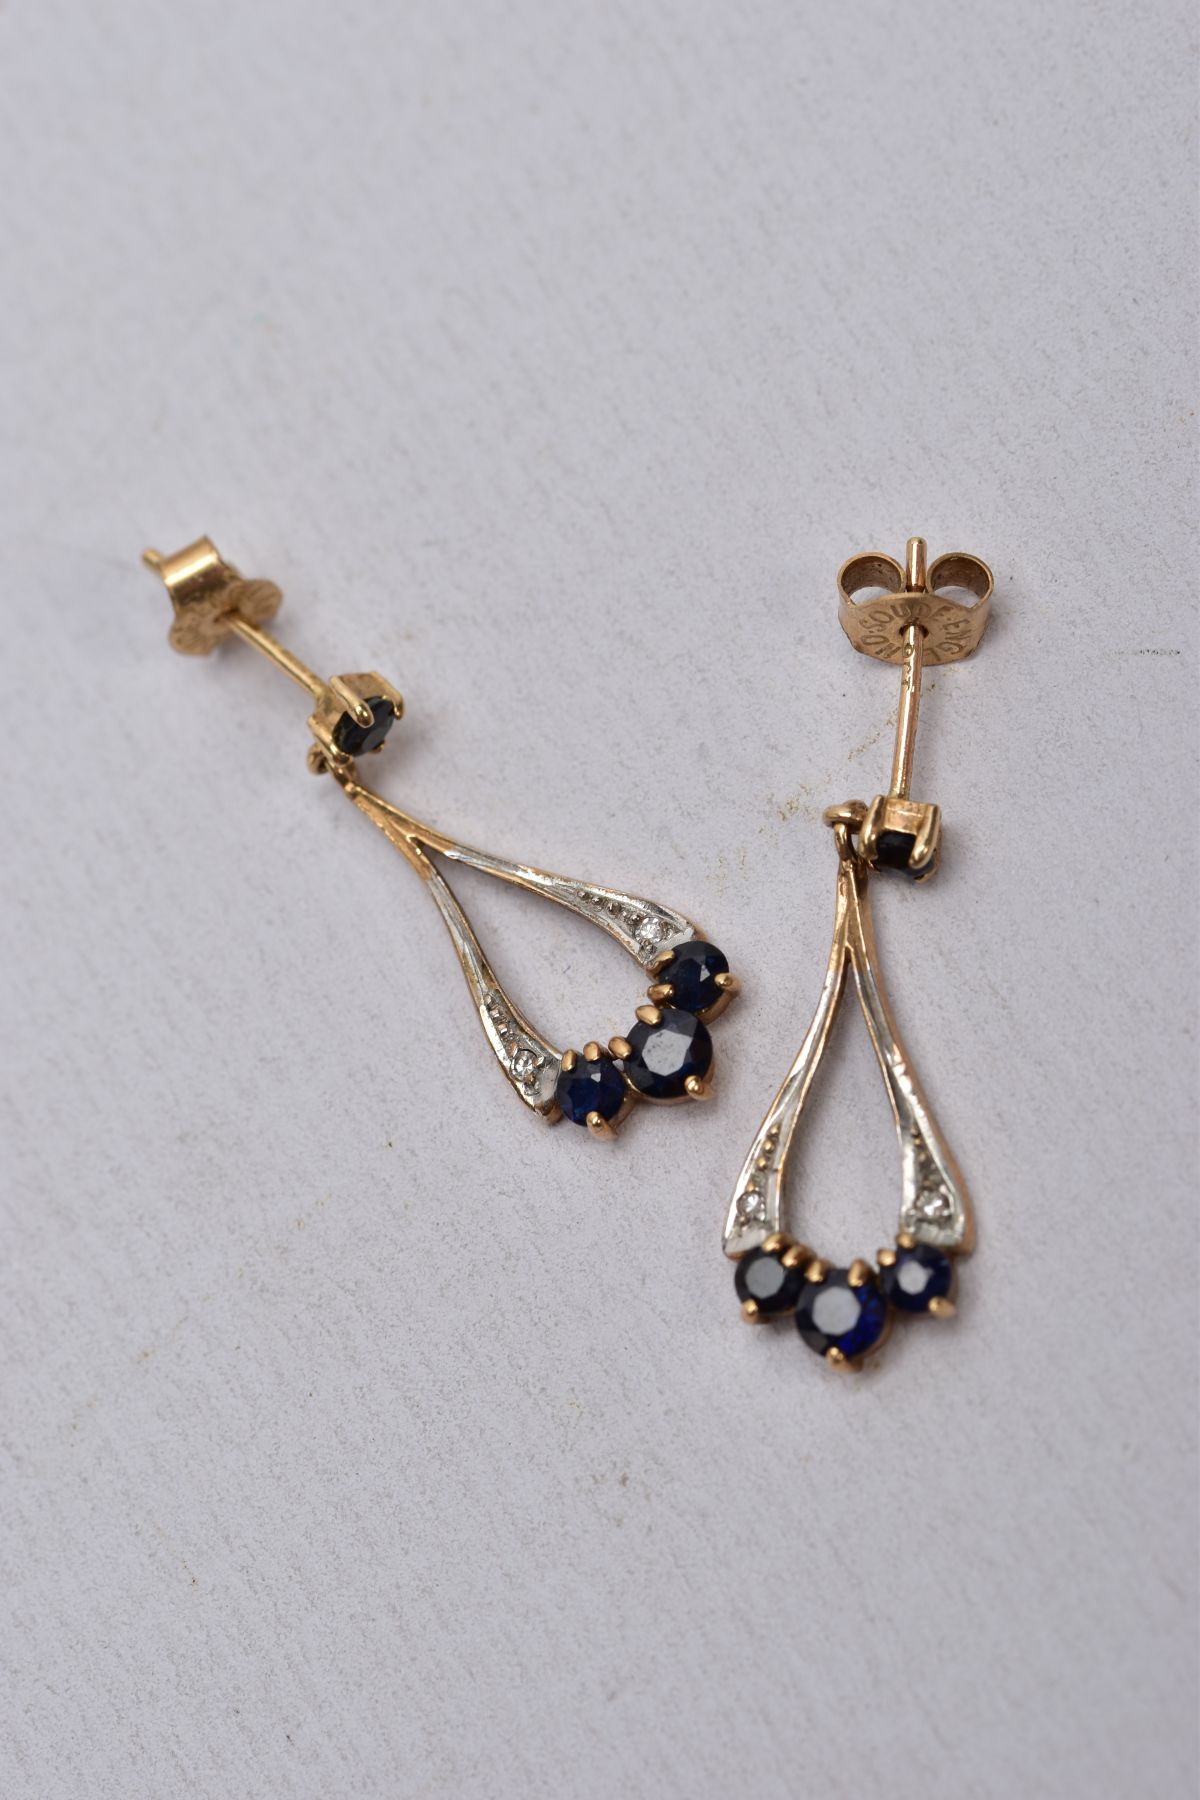 A PAIR OF 9CT GOLD SAPPHIRE AND DIAMOND DROP EARRINGS, TWO 9CT GOLD GEM SET PENDANTS AND A YELLOW - Image 5 of 5